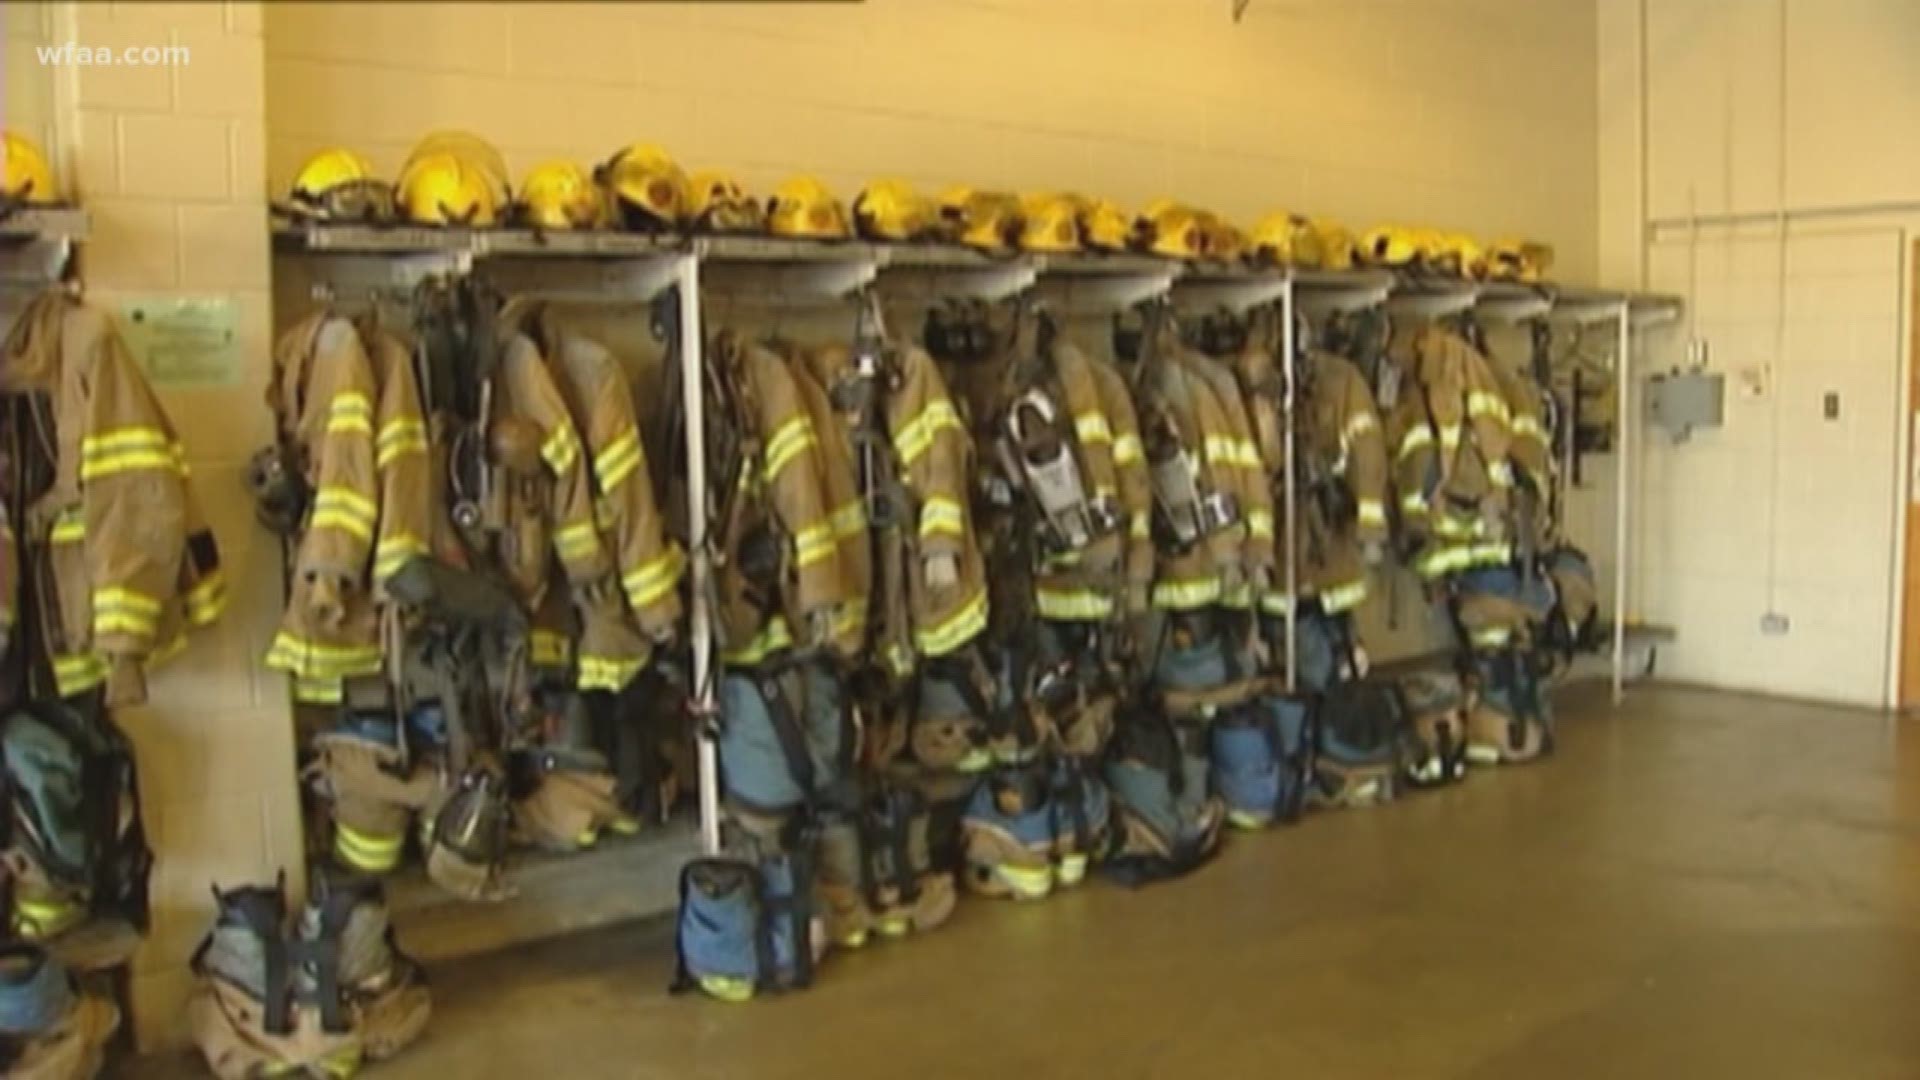 For firefighters in Dallas, this is about so much more than money.